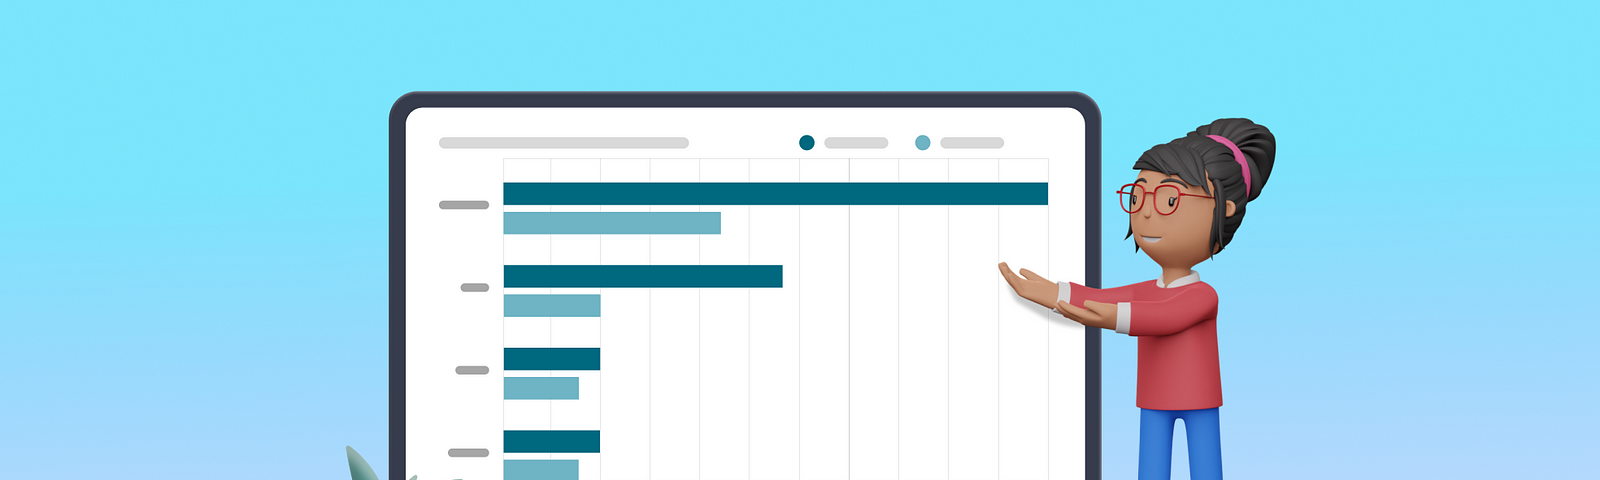 Manage and Visualize Your Projects with Bar Charts